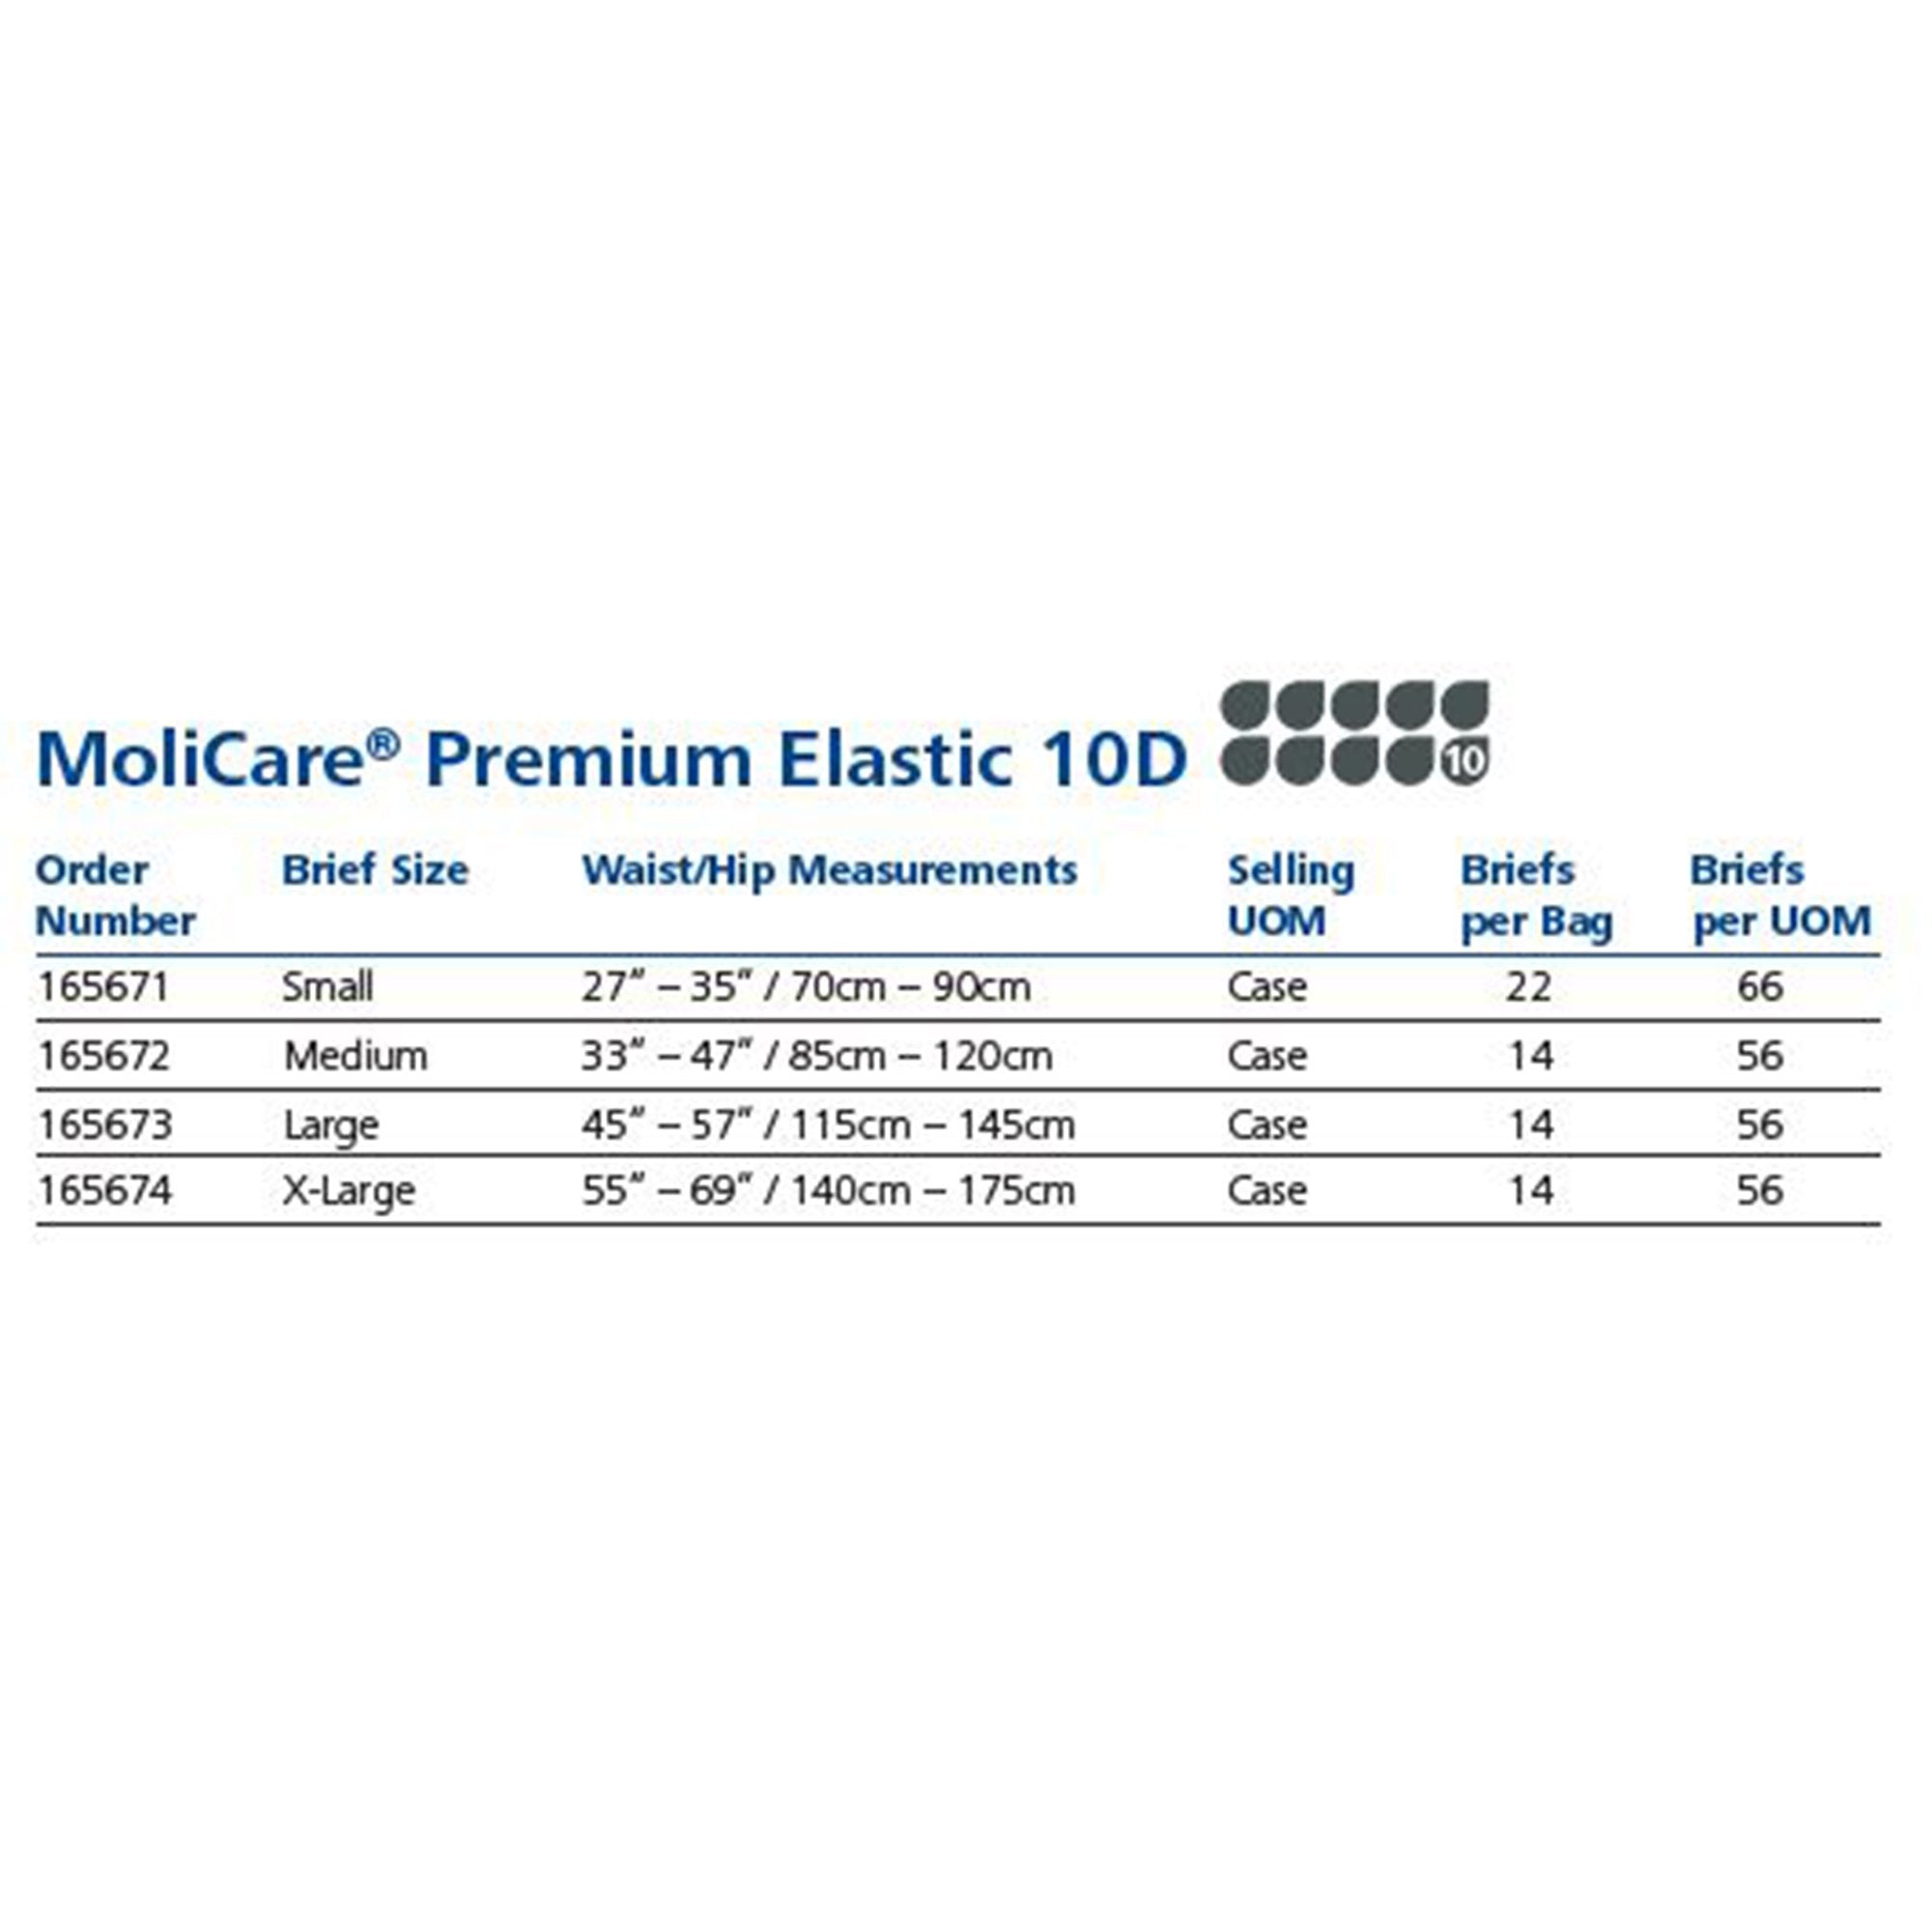 Unisex Adult Incontinence Brief MoliCare® Premium Elastic 10D X-Large Disposable Heavy Absorbency